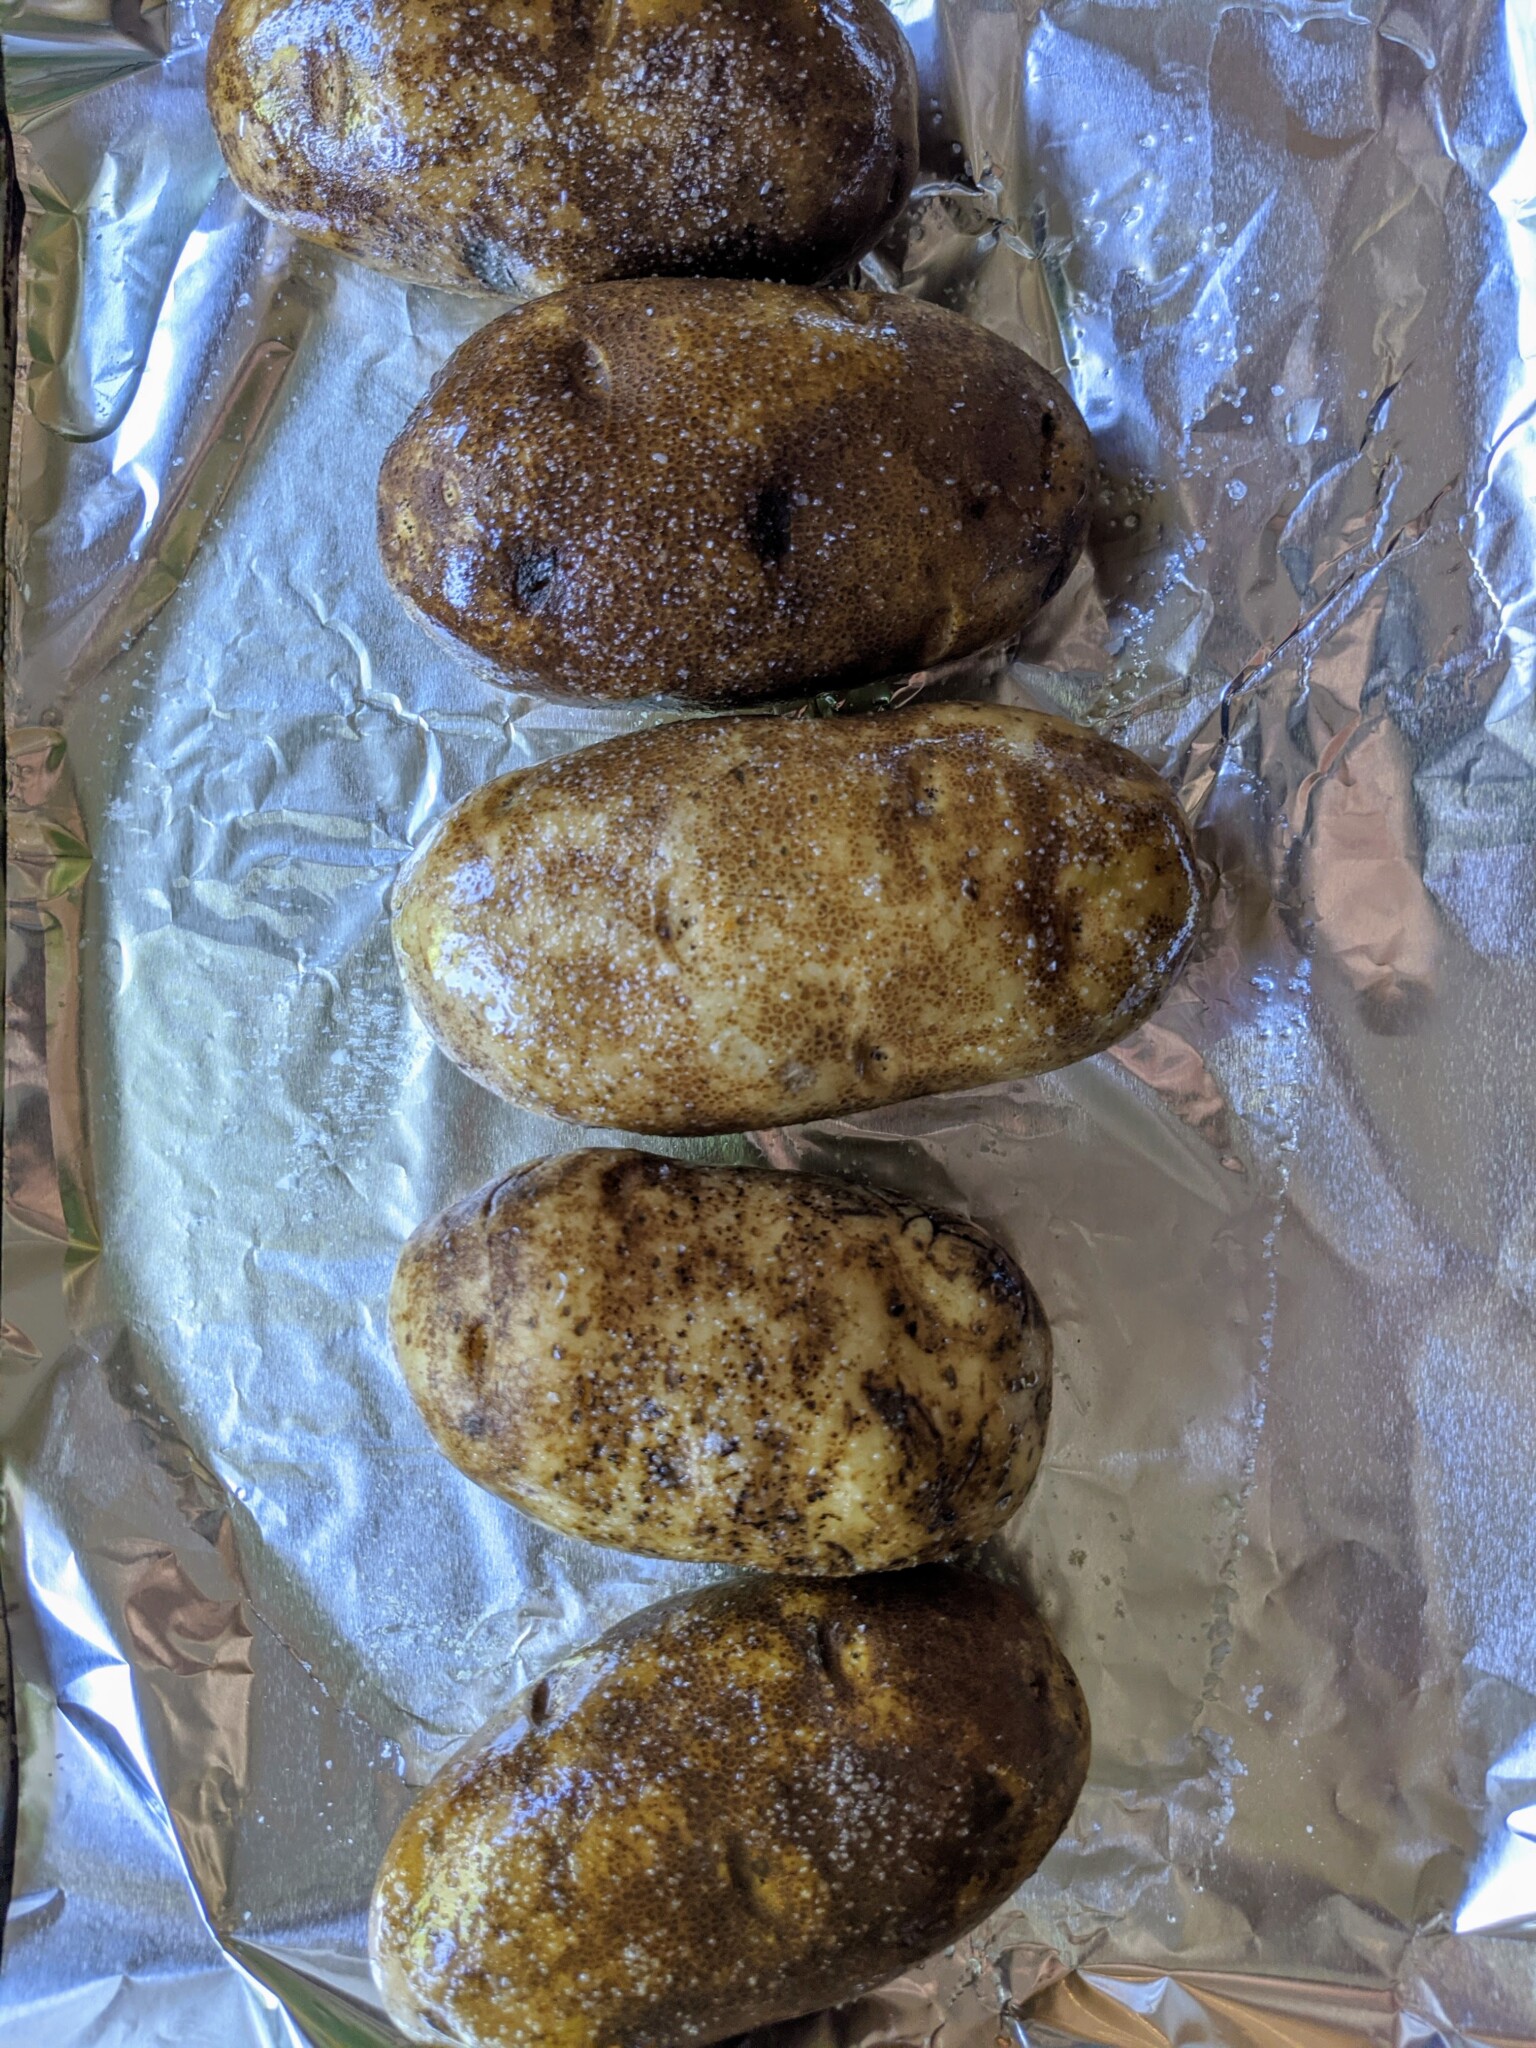 Oil rubbed russet potatoes ready to be baked 